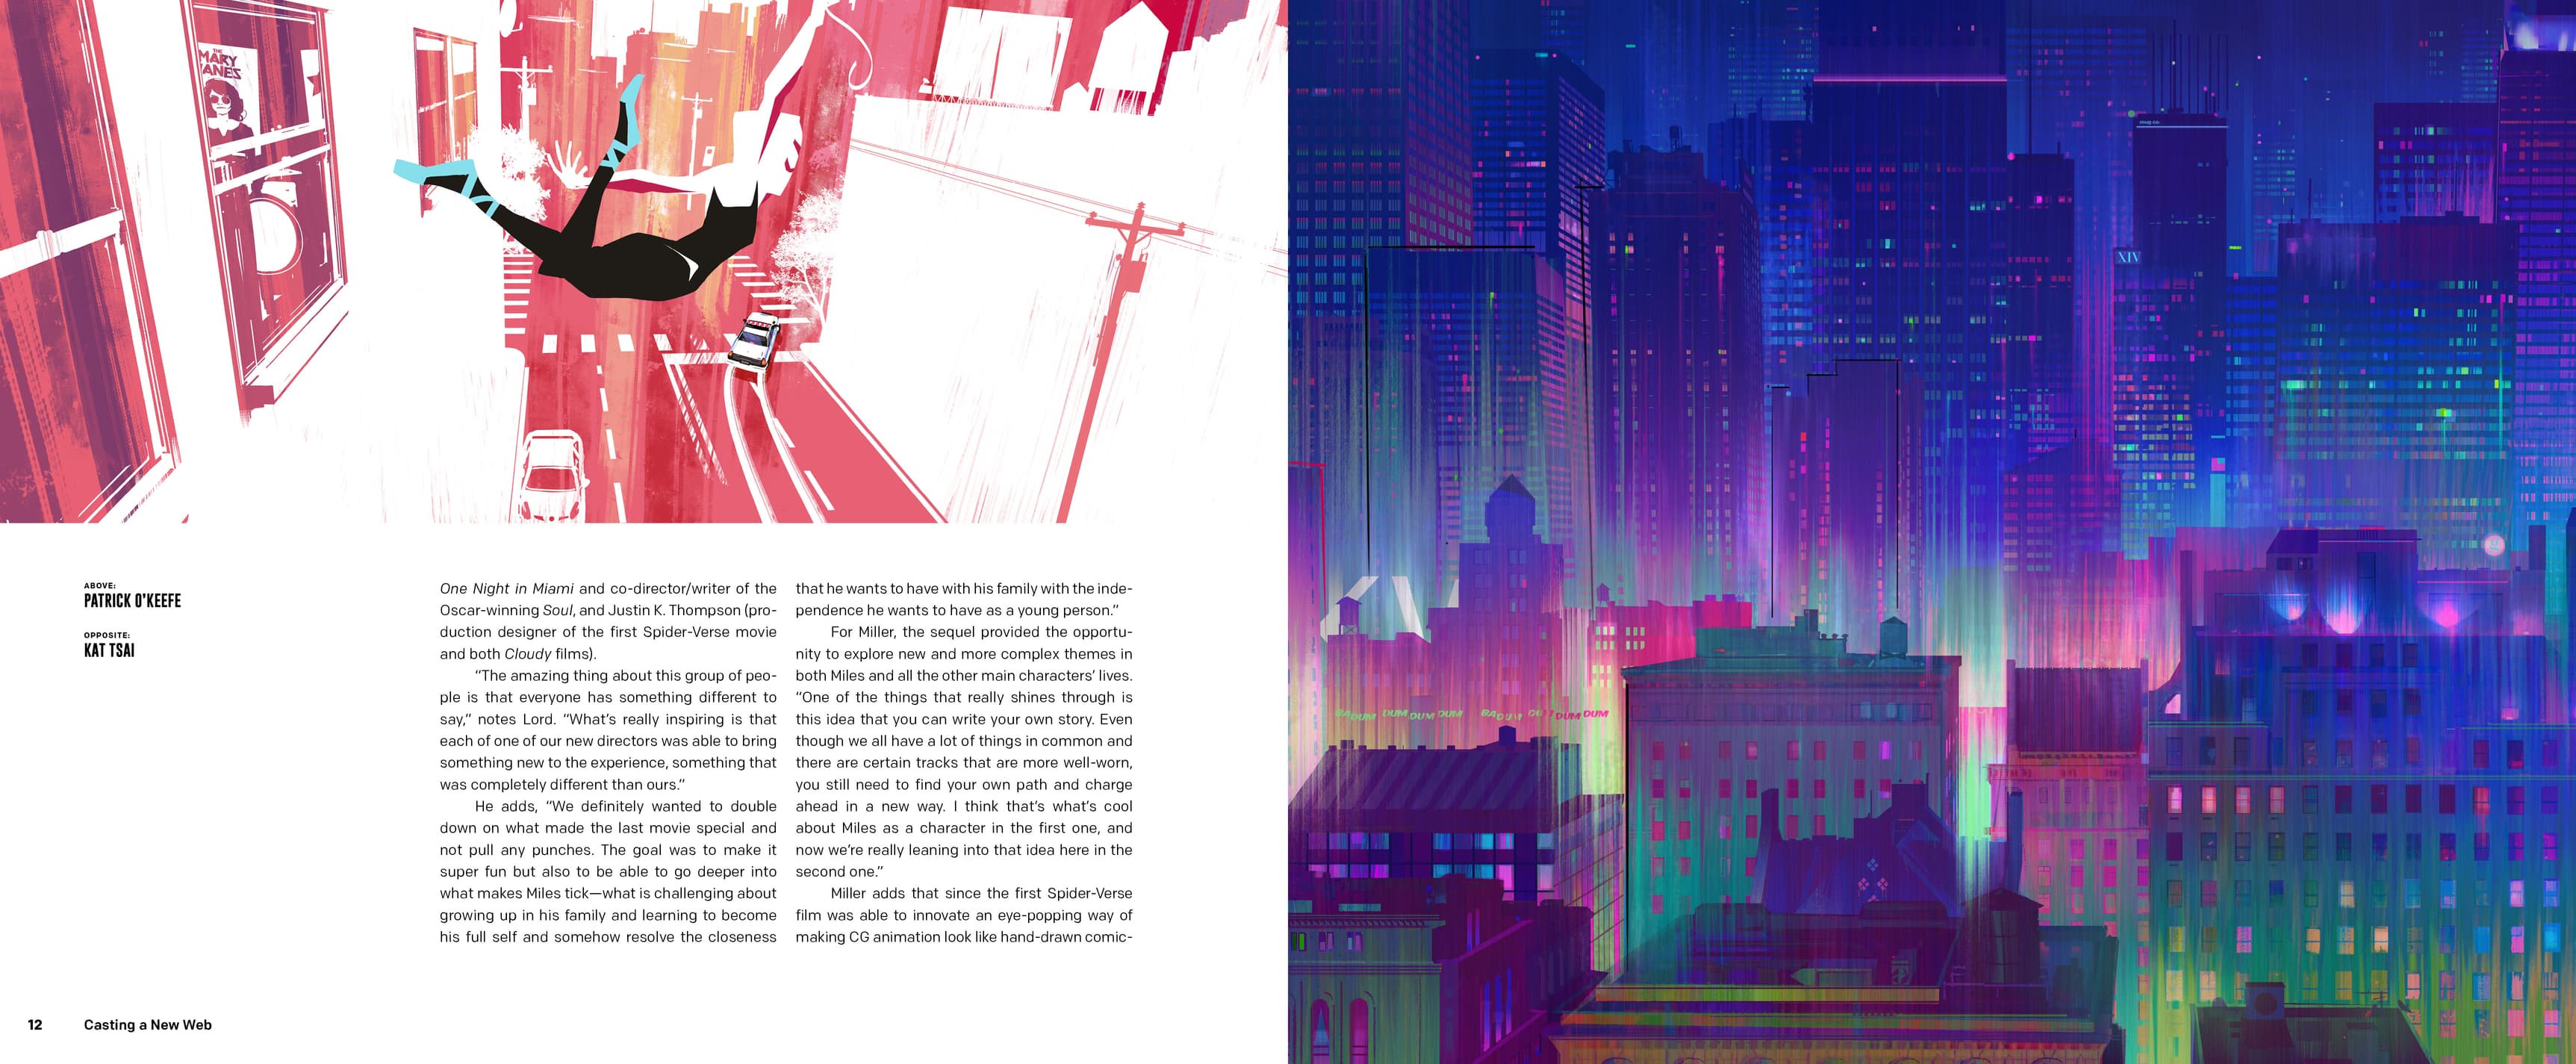 Spider-Man: Across the Spider-Verse: The Art of the Film excerpt